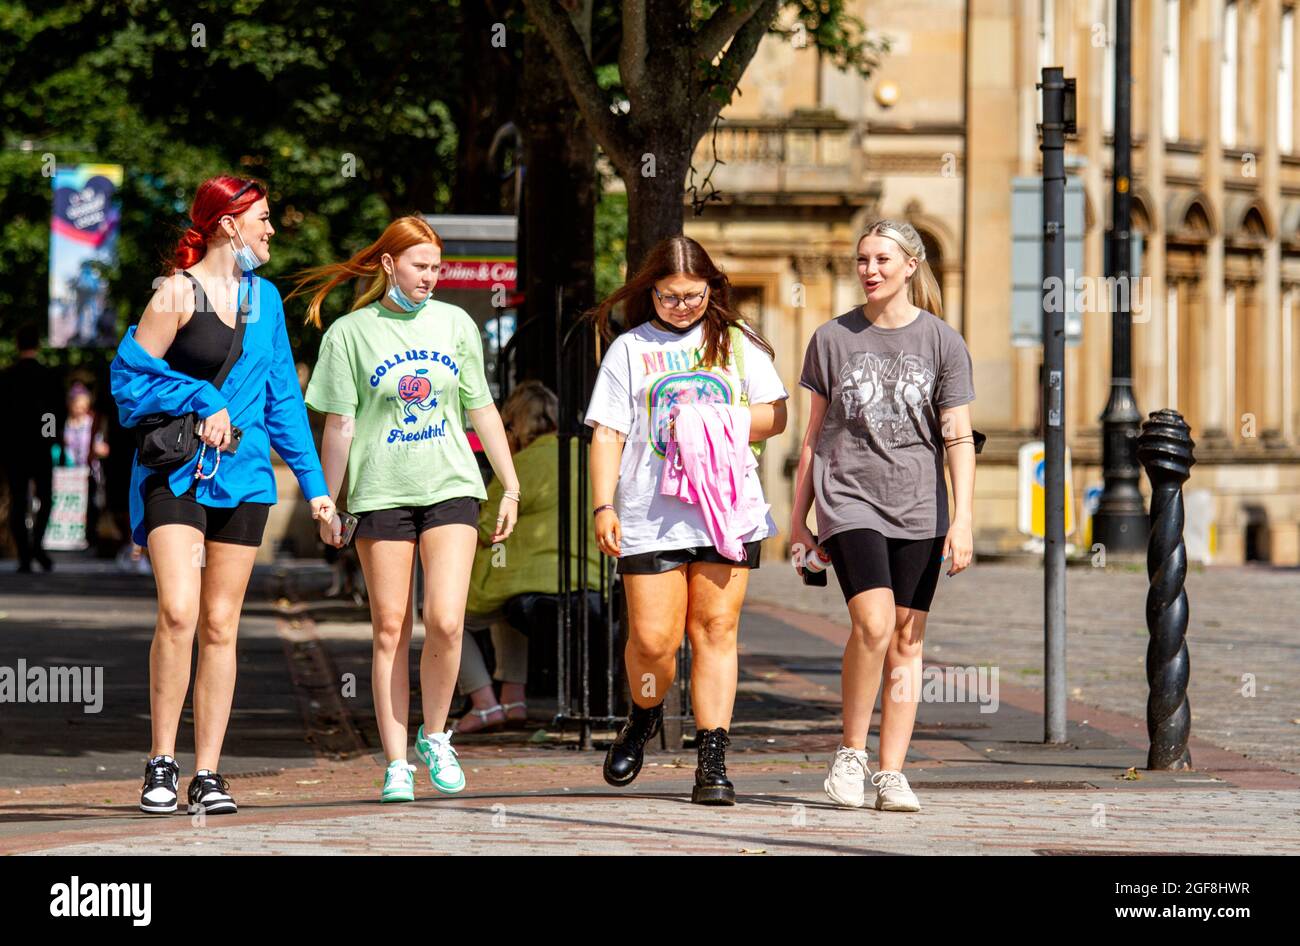 Dundee, Tayside, Scotland, UK. 24th Aug, 2021. UK weather: Glorious warm sunshine across North East Scotland with temperatures reaching 21°C. The late Summer heatwave attracts many local resident to take the day out to enjoy socialising outside after months of Coronavirus lockdowns. four glamorous young women enjoying the weather walking together having fun in Dundee city centre. Credit: Dundee Photographics/Alamy Live News Stock Photo